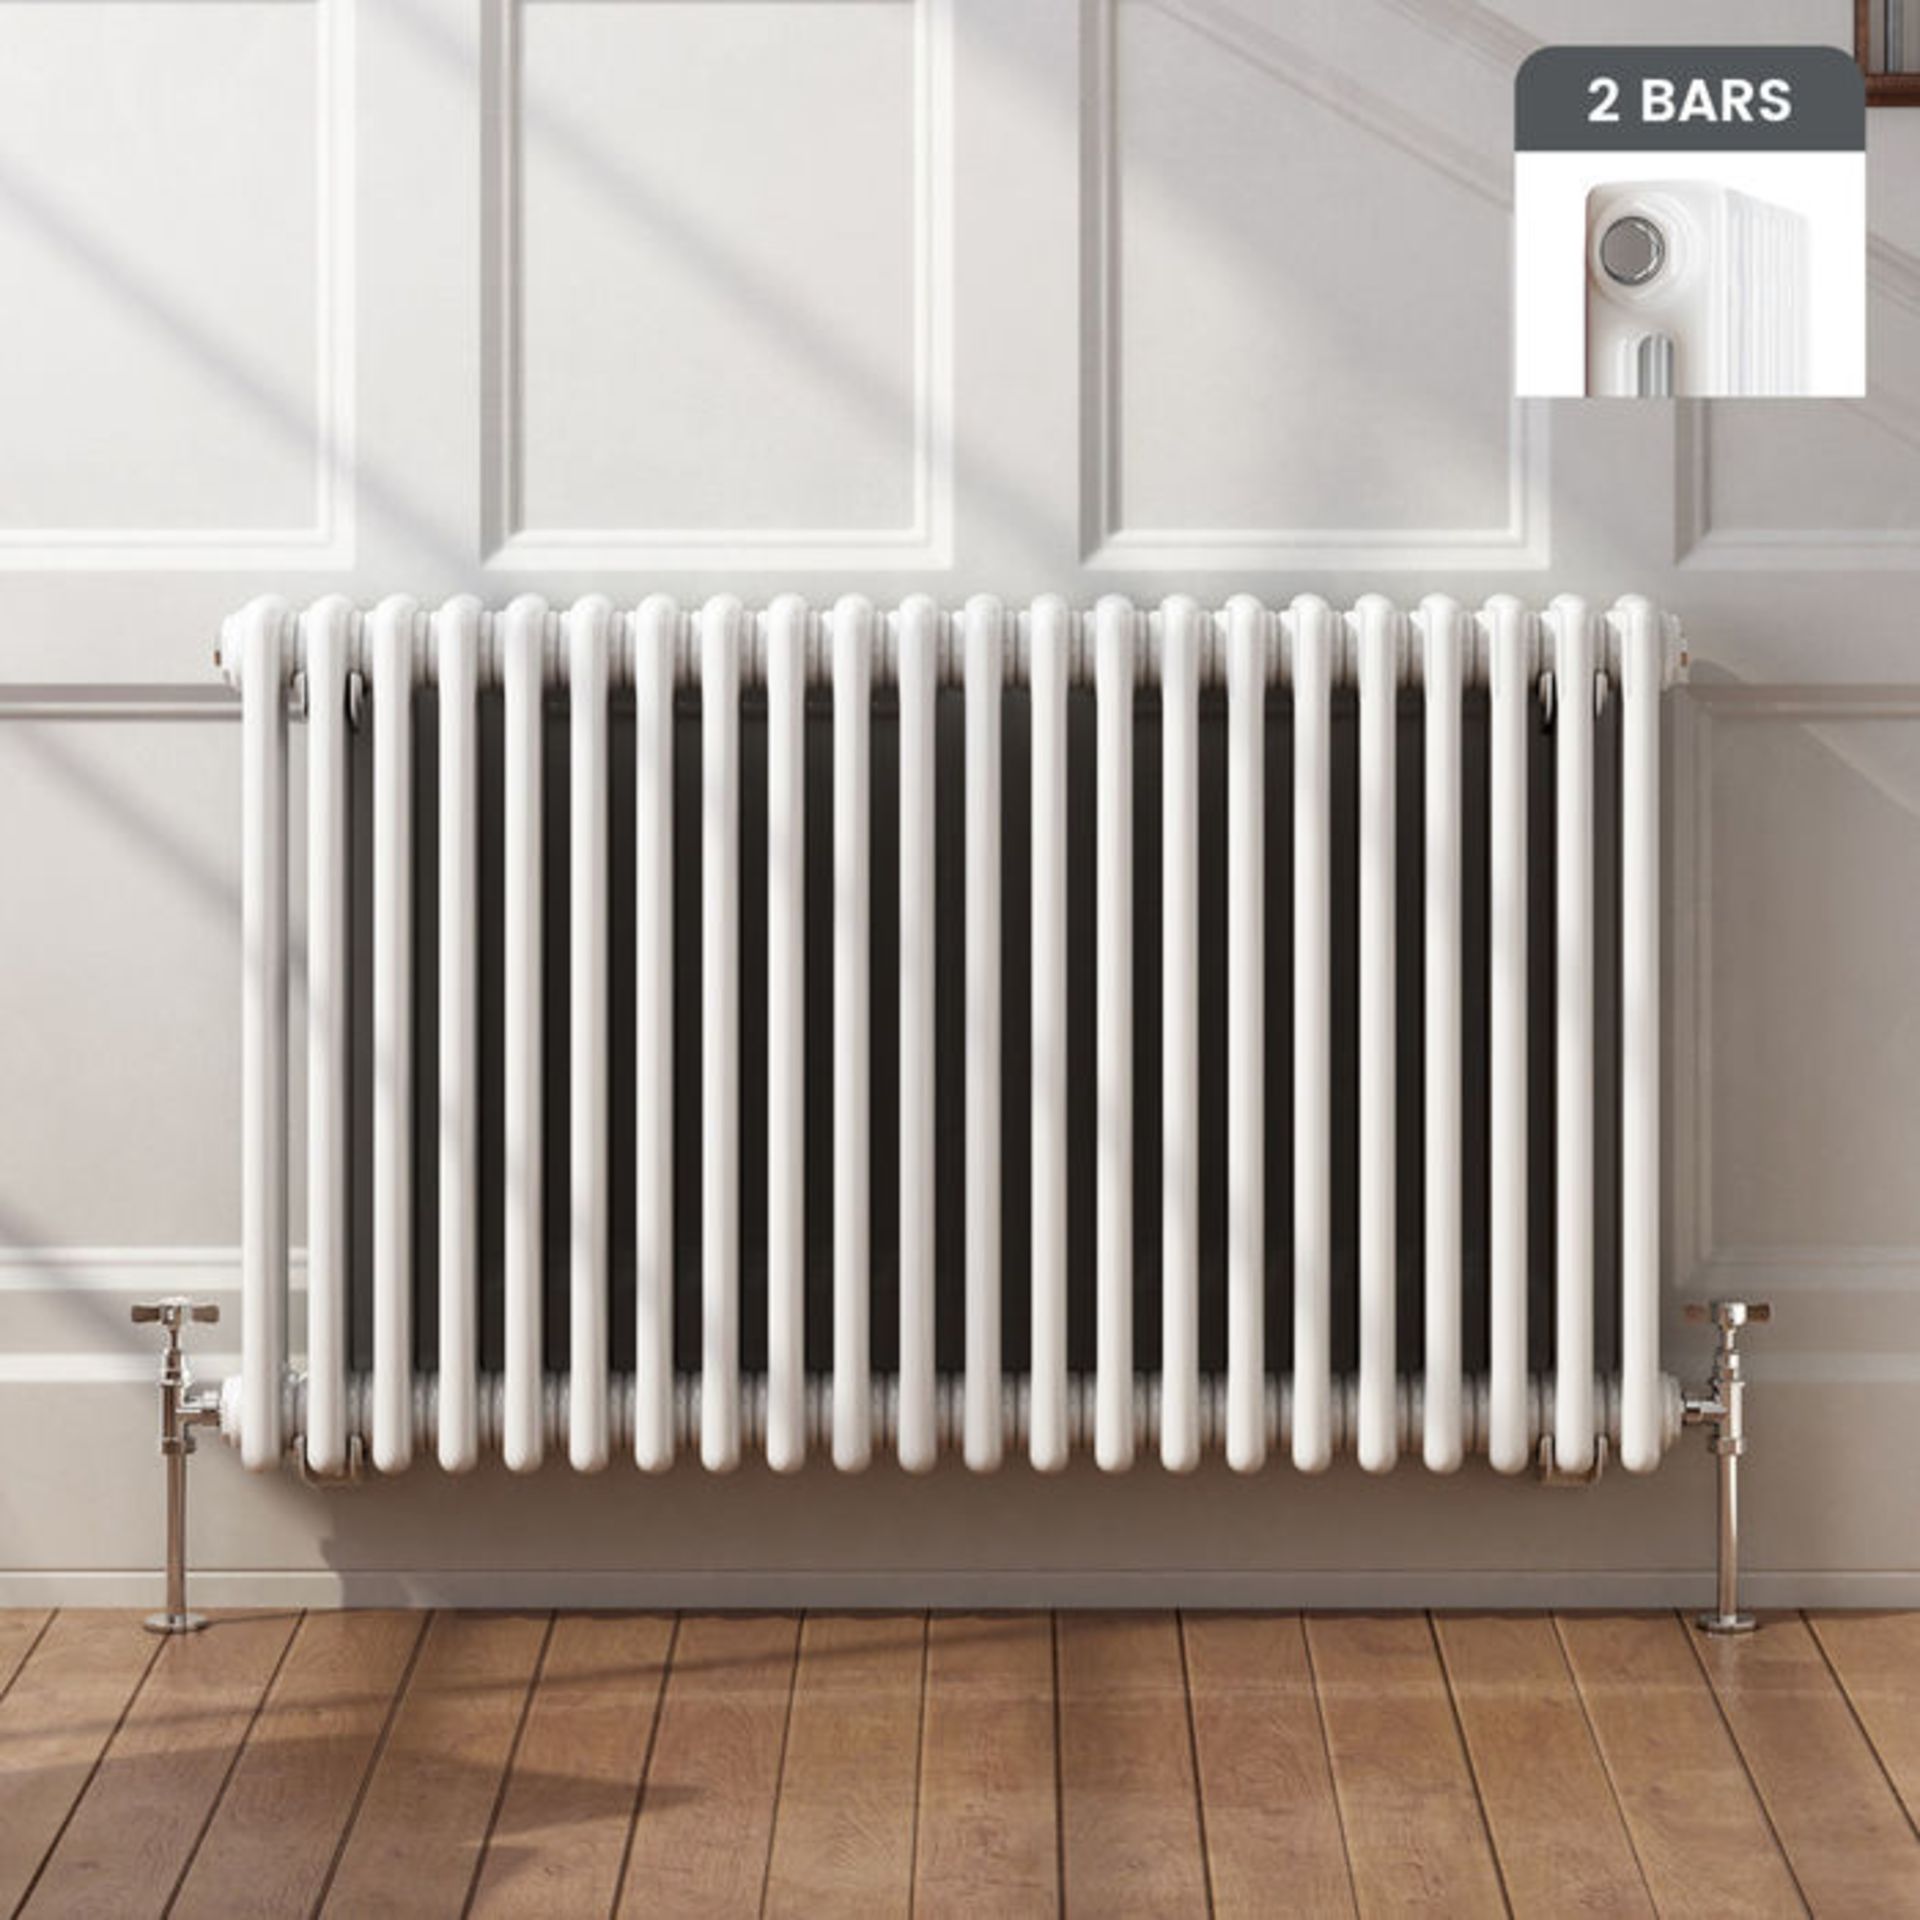 (XS11) 600x1008mm White Double Panel Horizontal Colosseum Traditional Radiator. RRP £429.99. Made